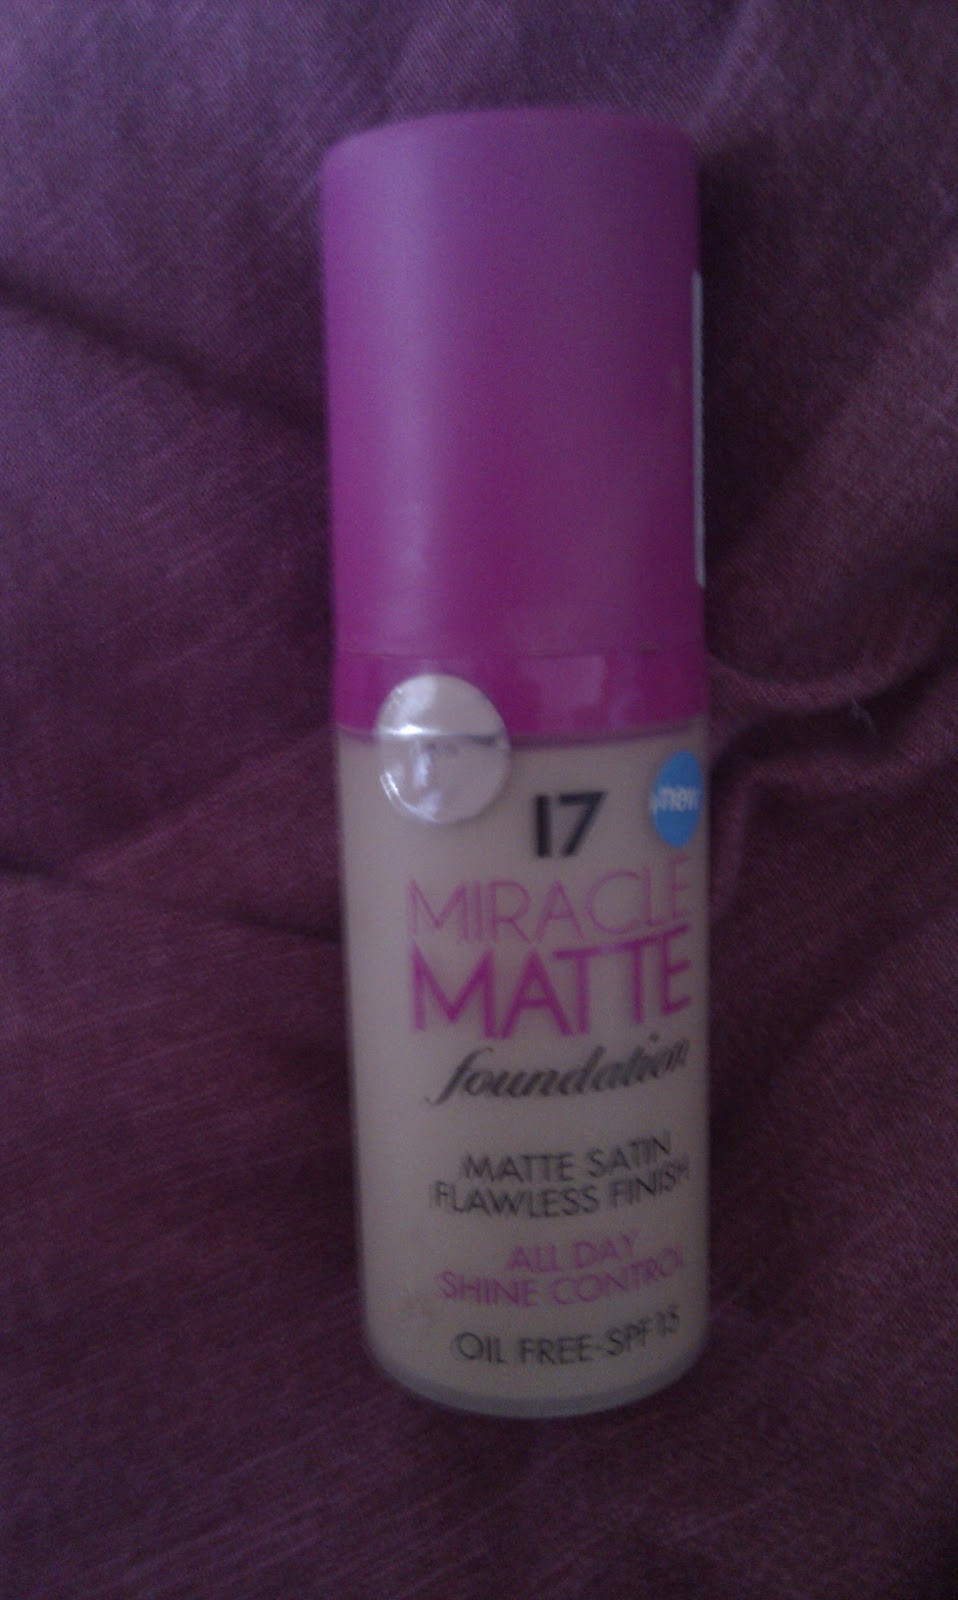 Review: 17 Miracle Matte Foundation Update